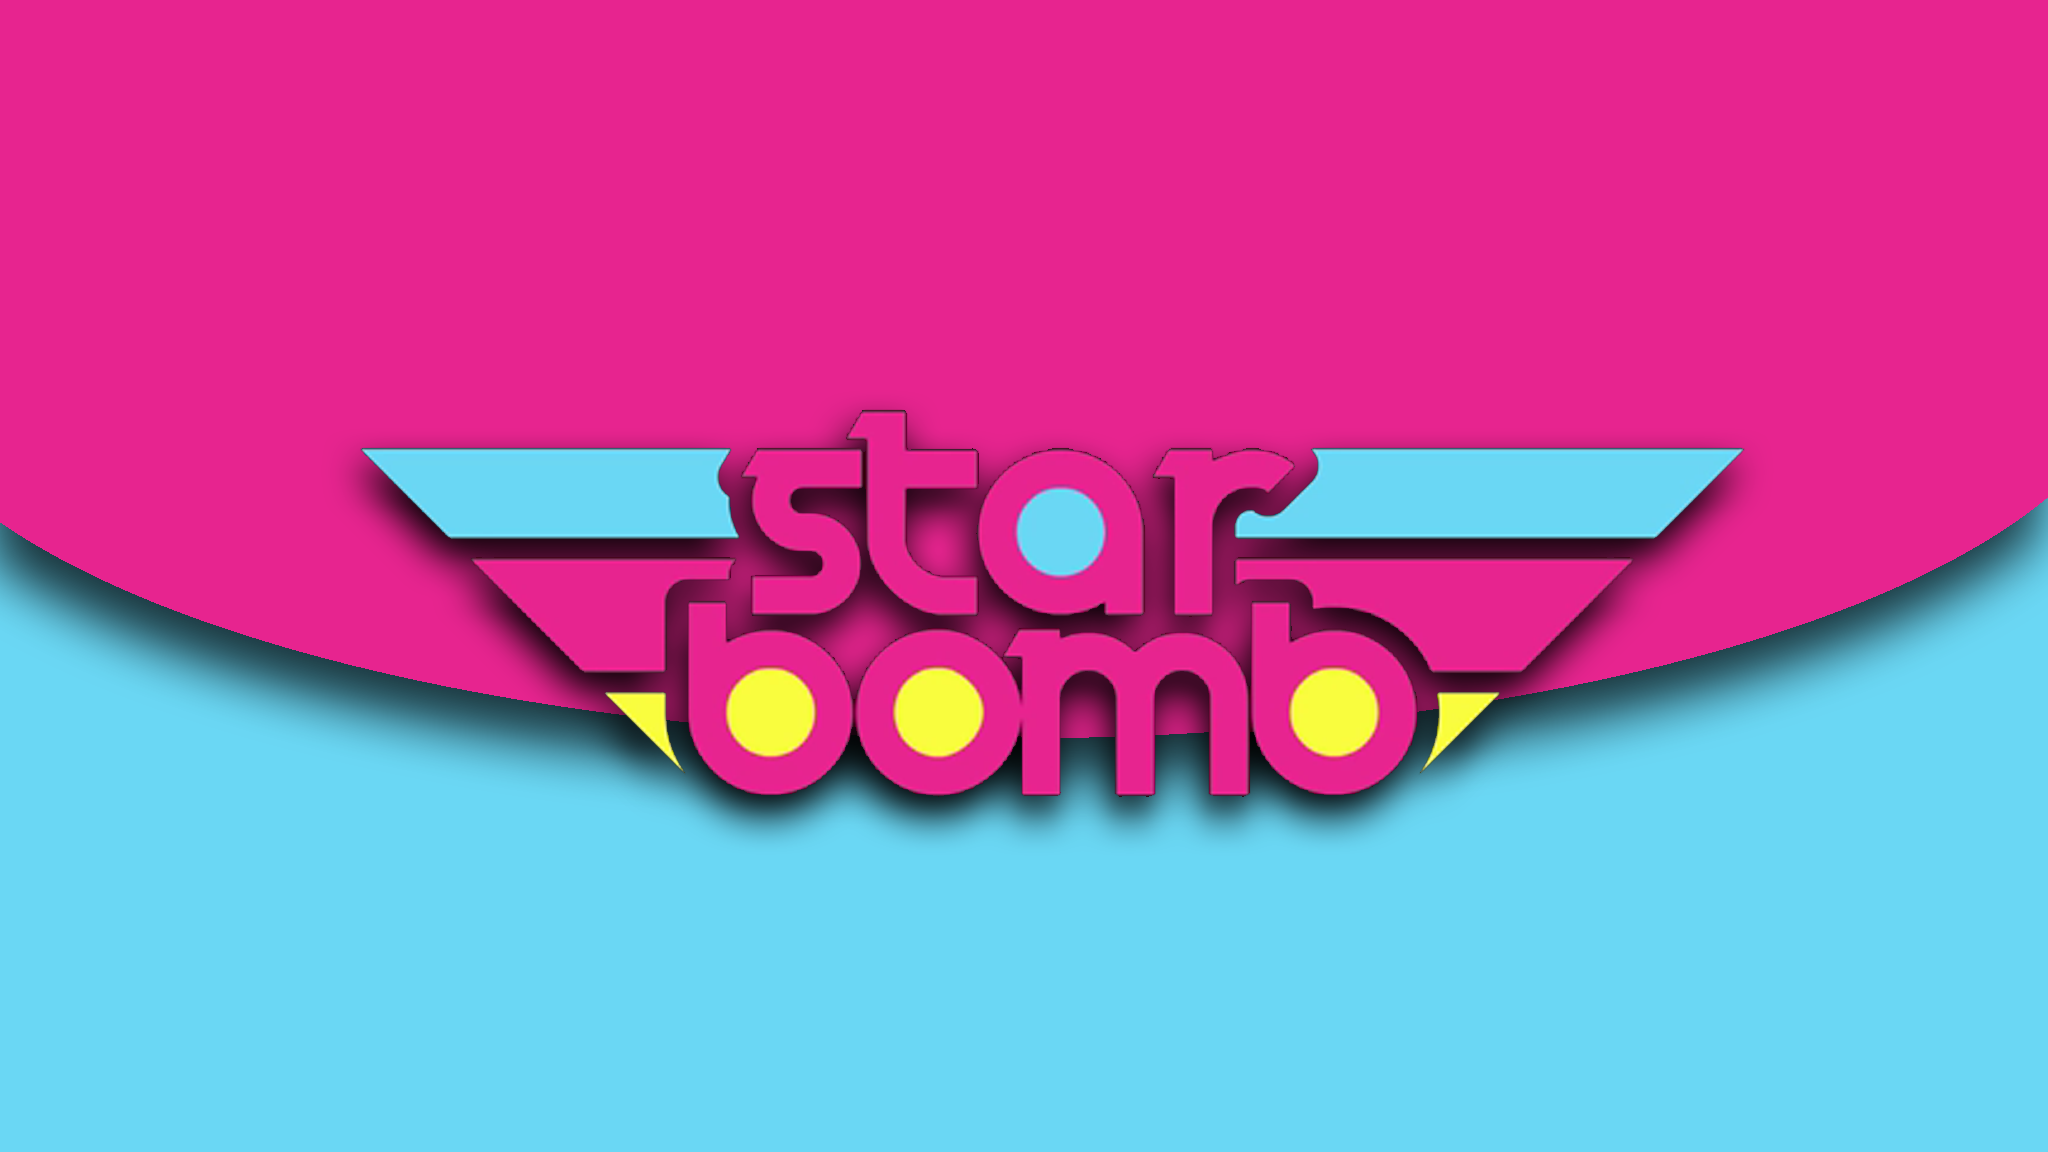 starbomb tribute wallpaper by seecer2 on Newgrounds 2048x1152